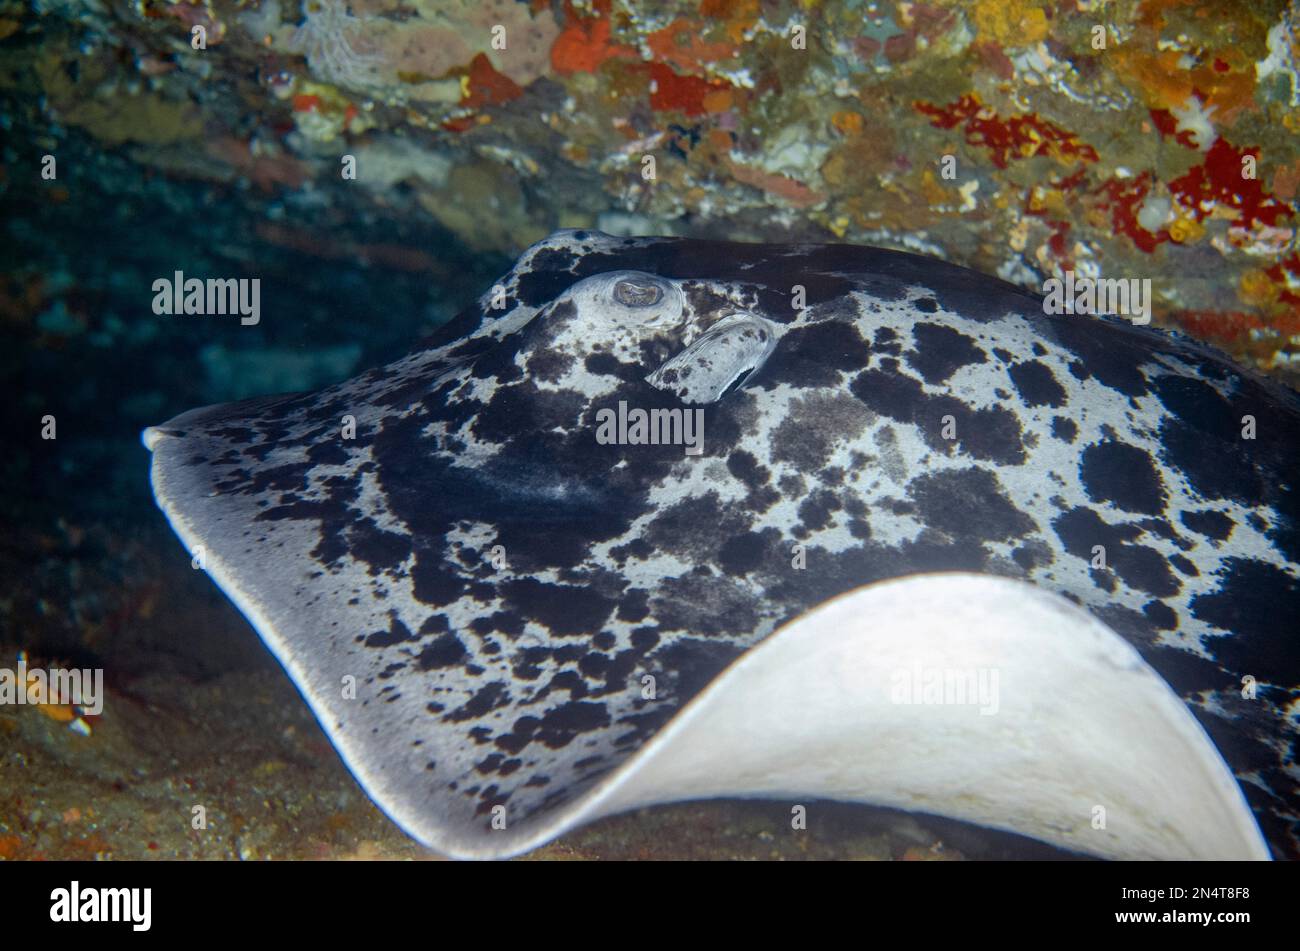 Marbled Stingray, Taeniura meyenis, classified as Vulnerable as it is slow-reproducing and threatened by commercial fishing and habitat degradation, B Stock Photo